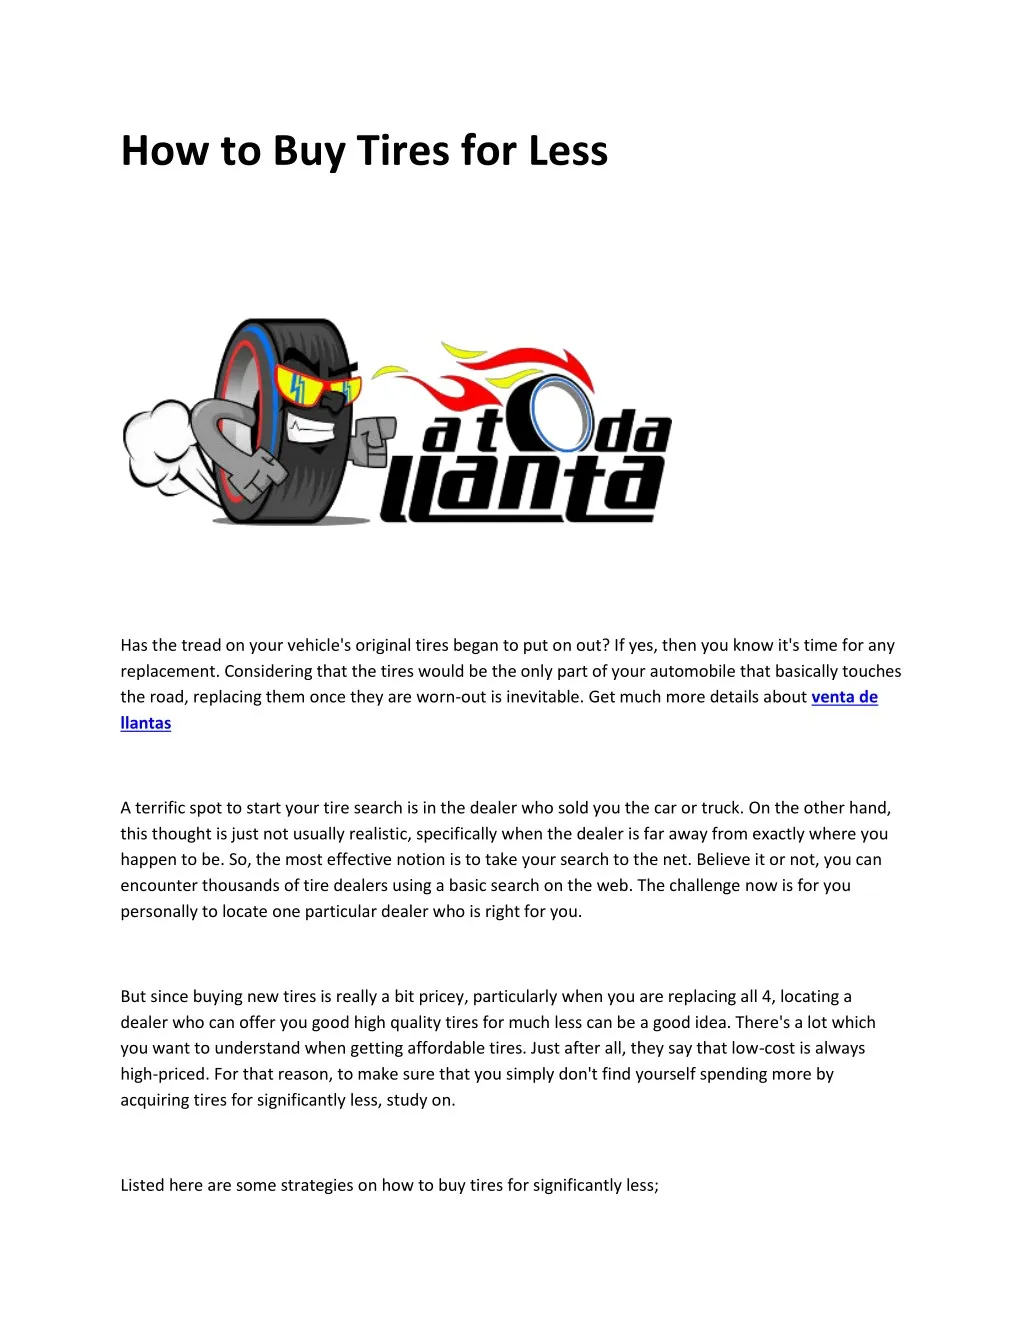 how to buy tires for less